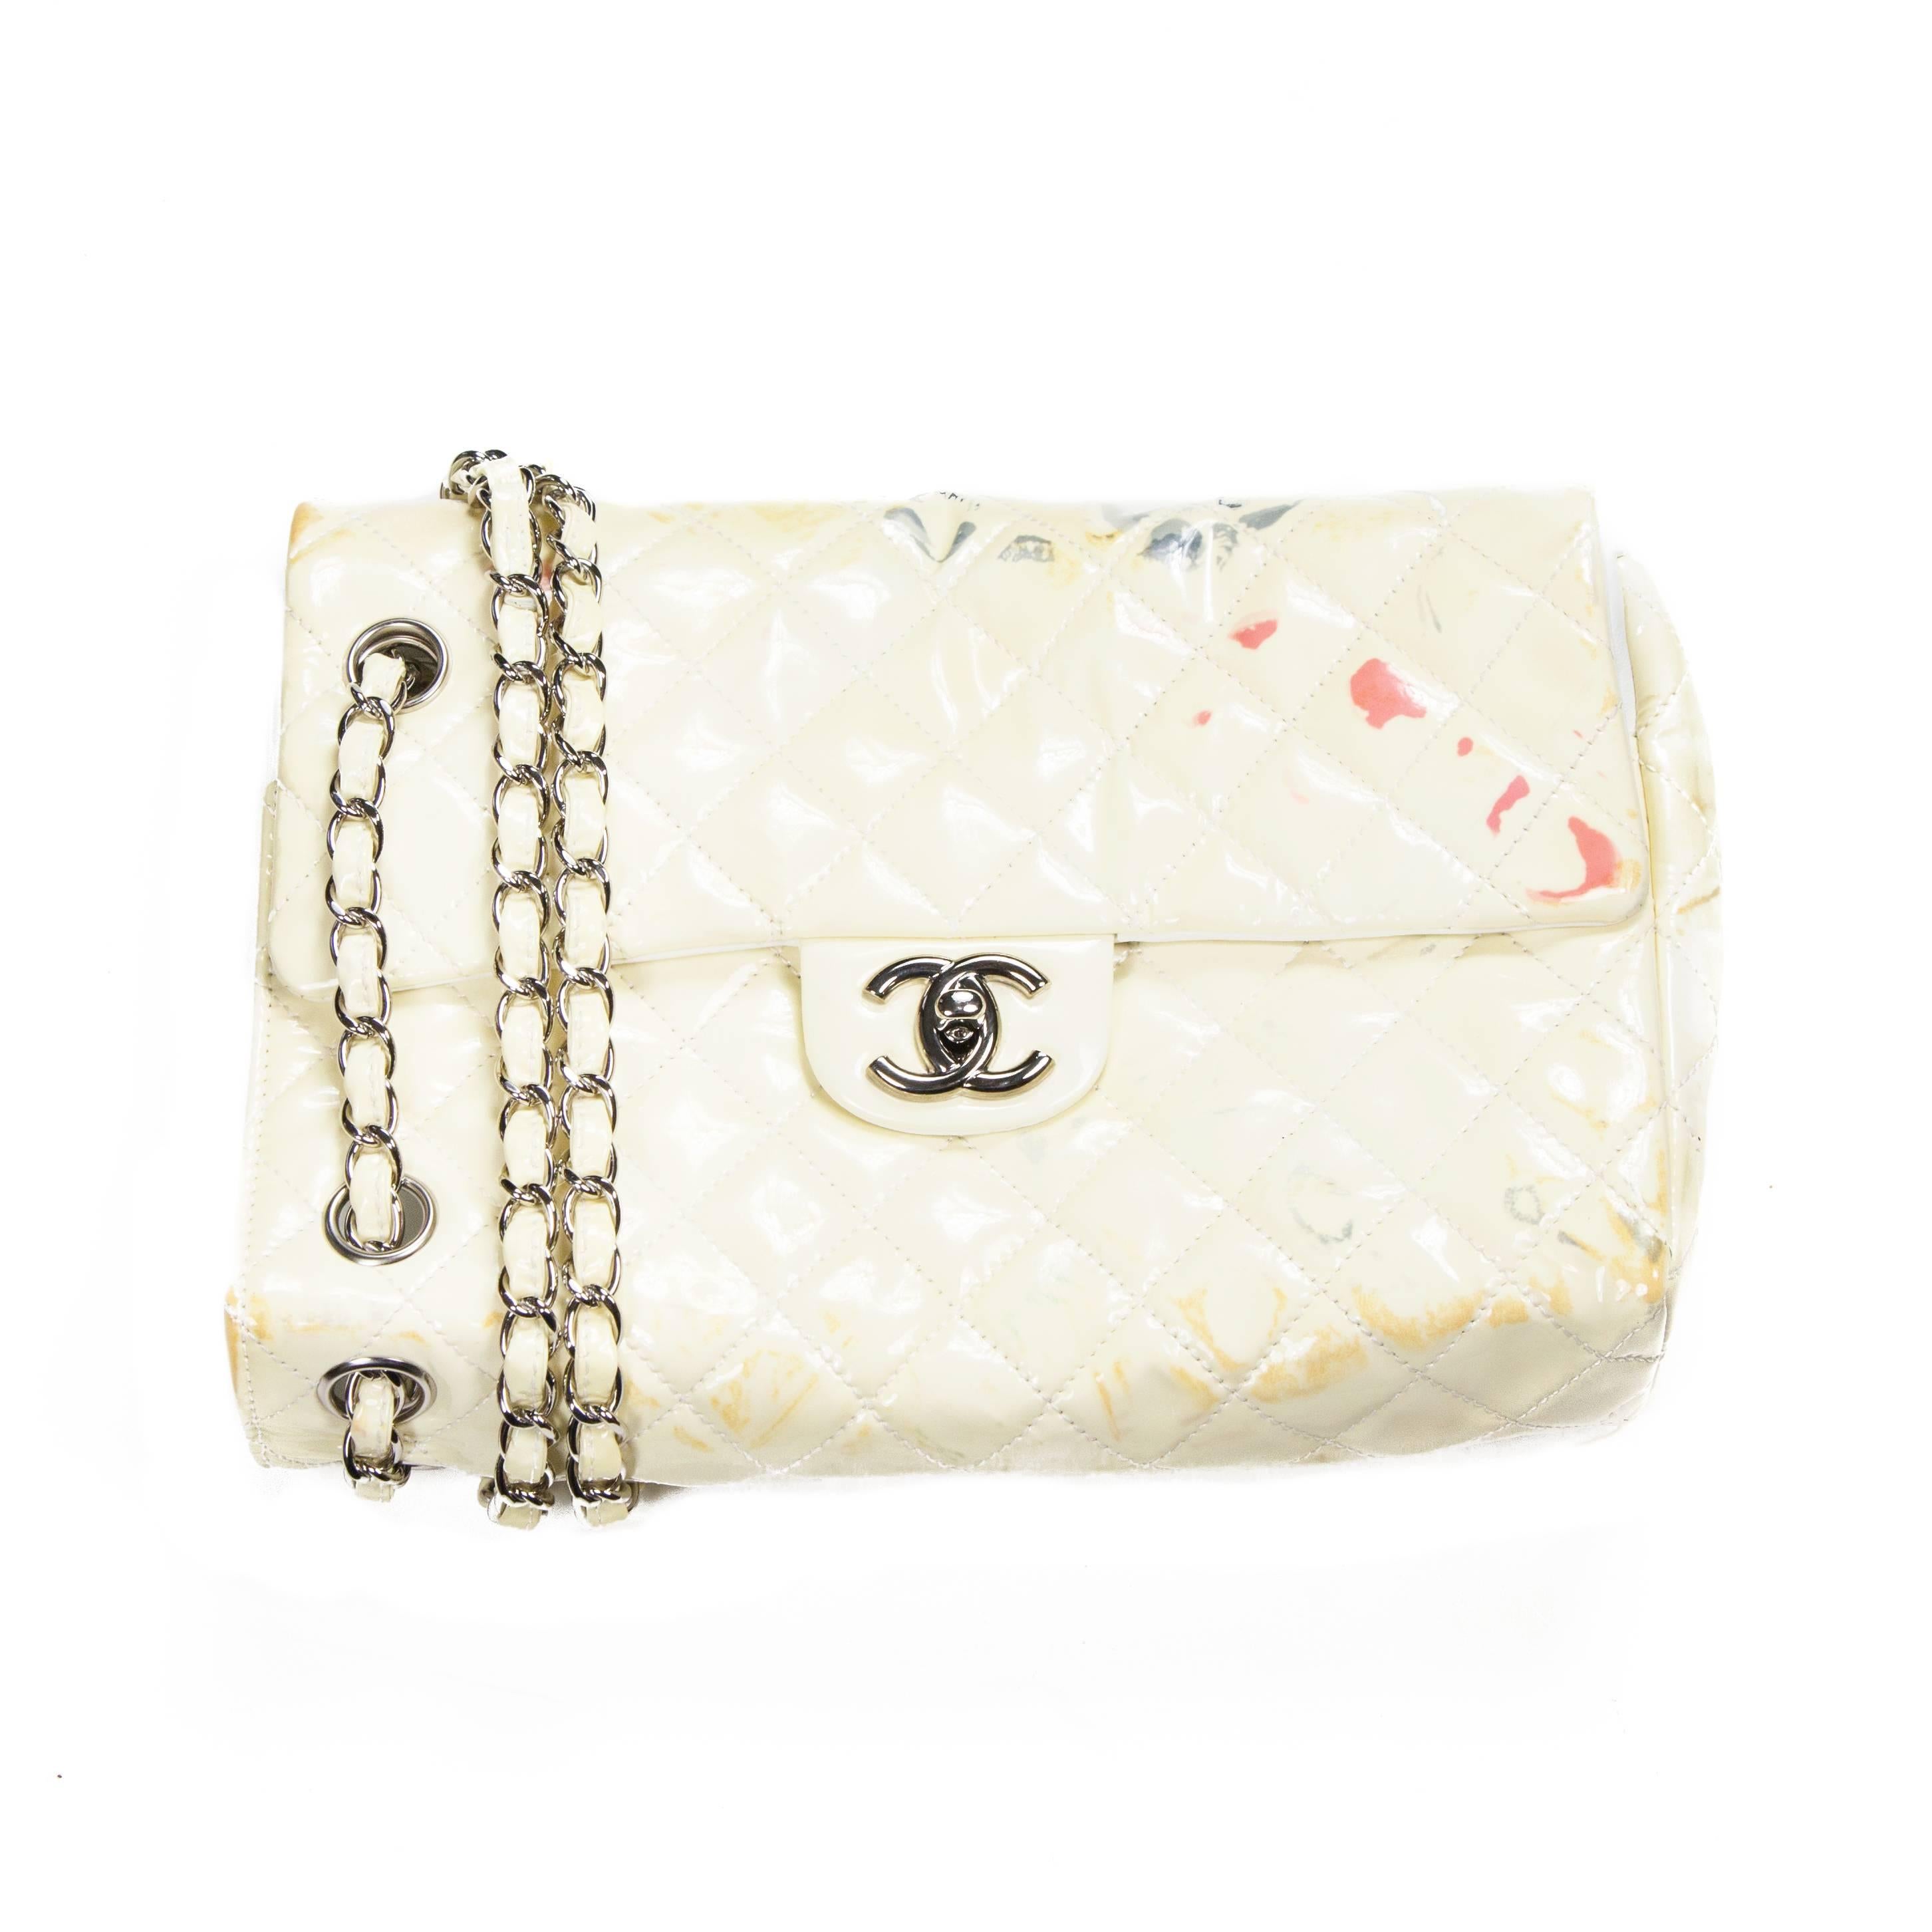 Chanel - Sideways Shoulder Bag

Color: White / Cream

Material: Patent Leather

------------------------------------------------------------

Details:

- bag created to be held vertically so it looks sideways

- can be worn with single